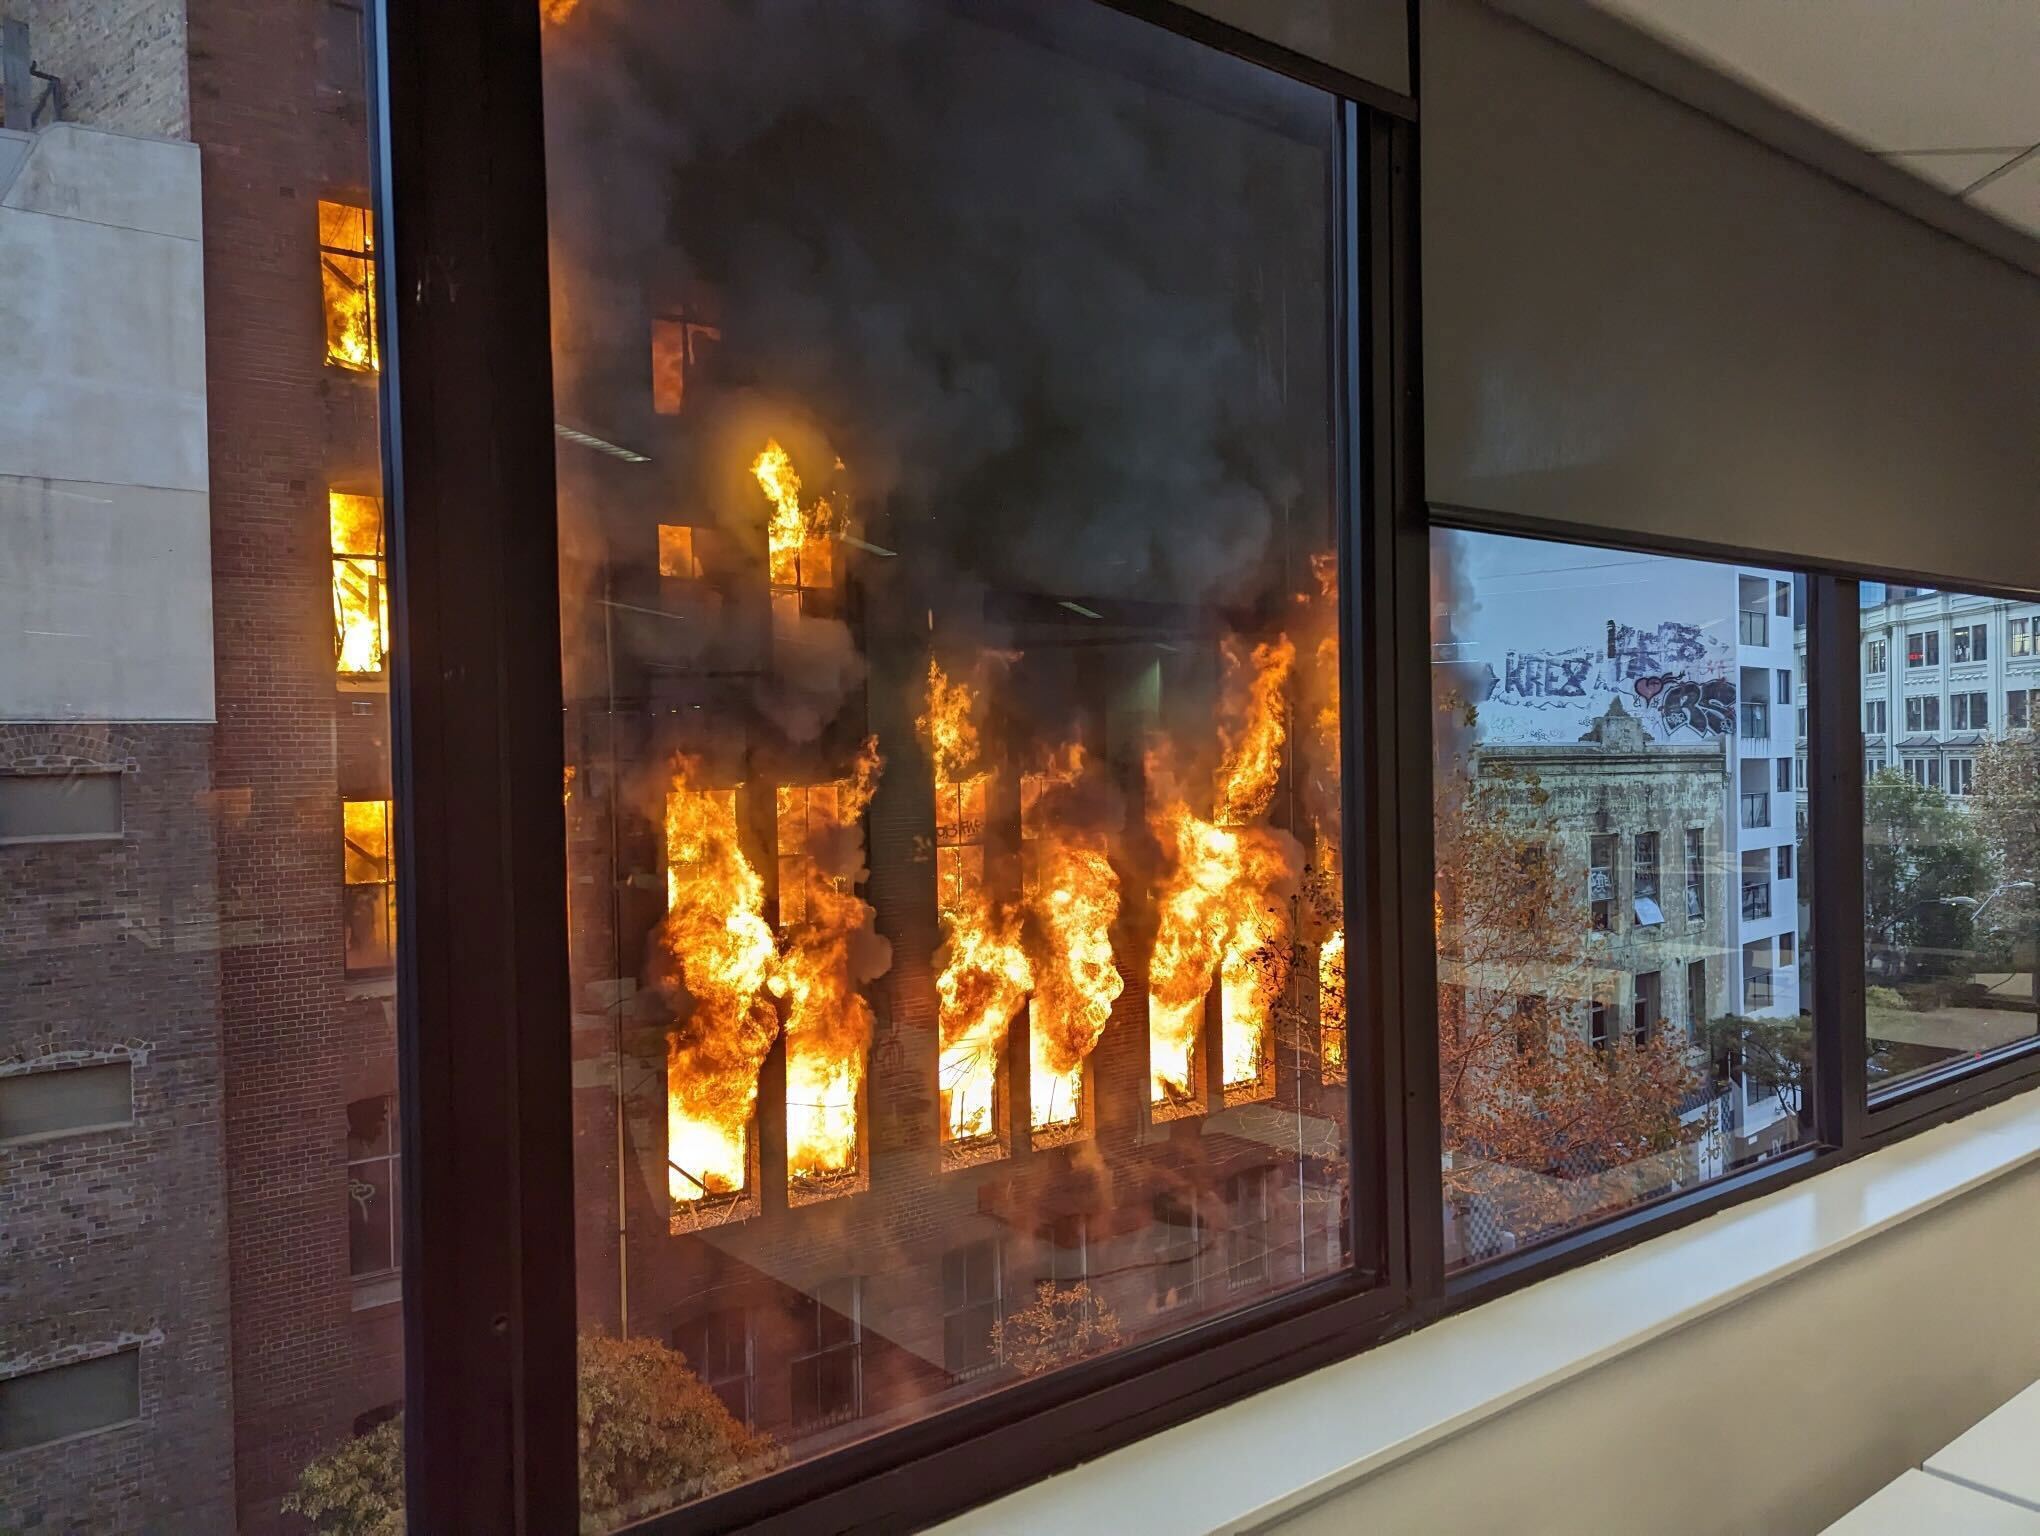 Watching commuters and office workers were left stunned by the blaze.